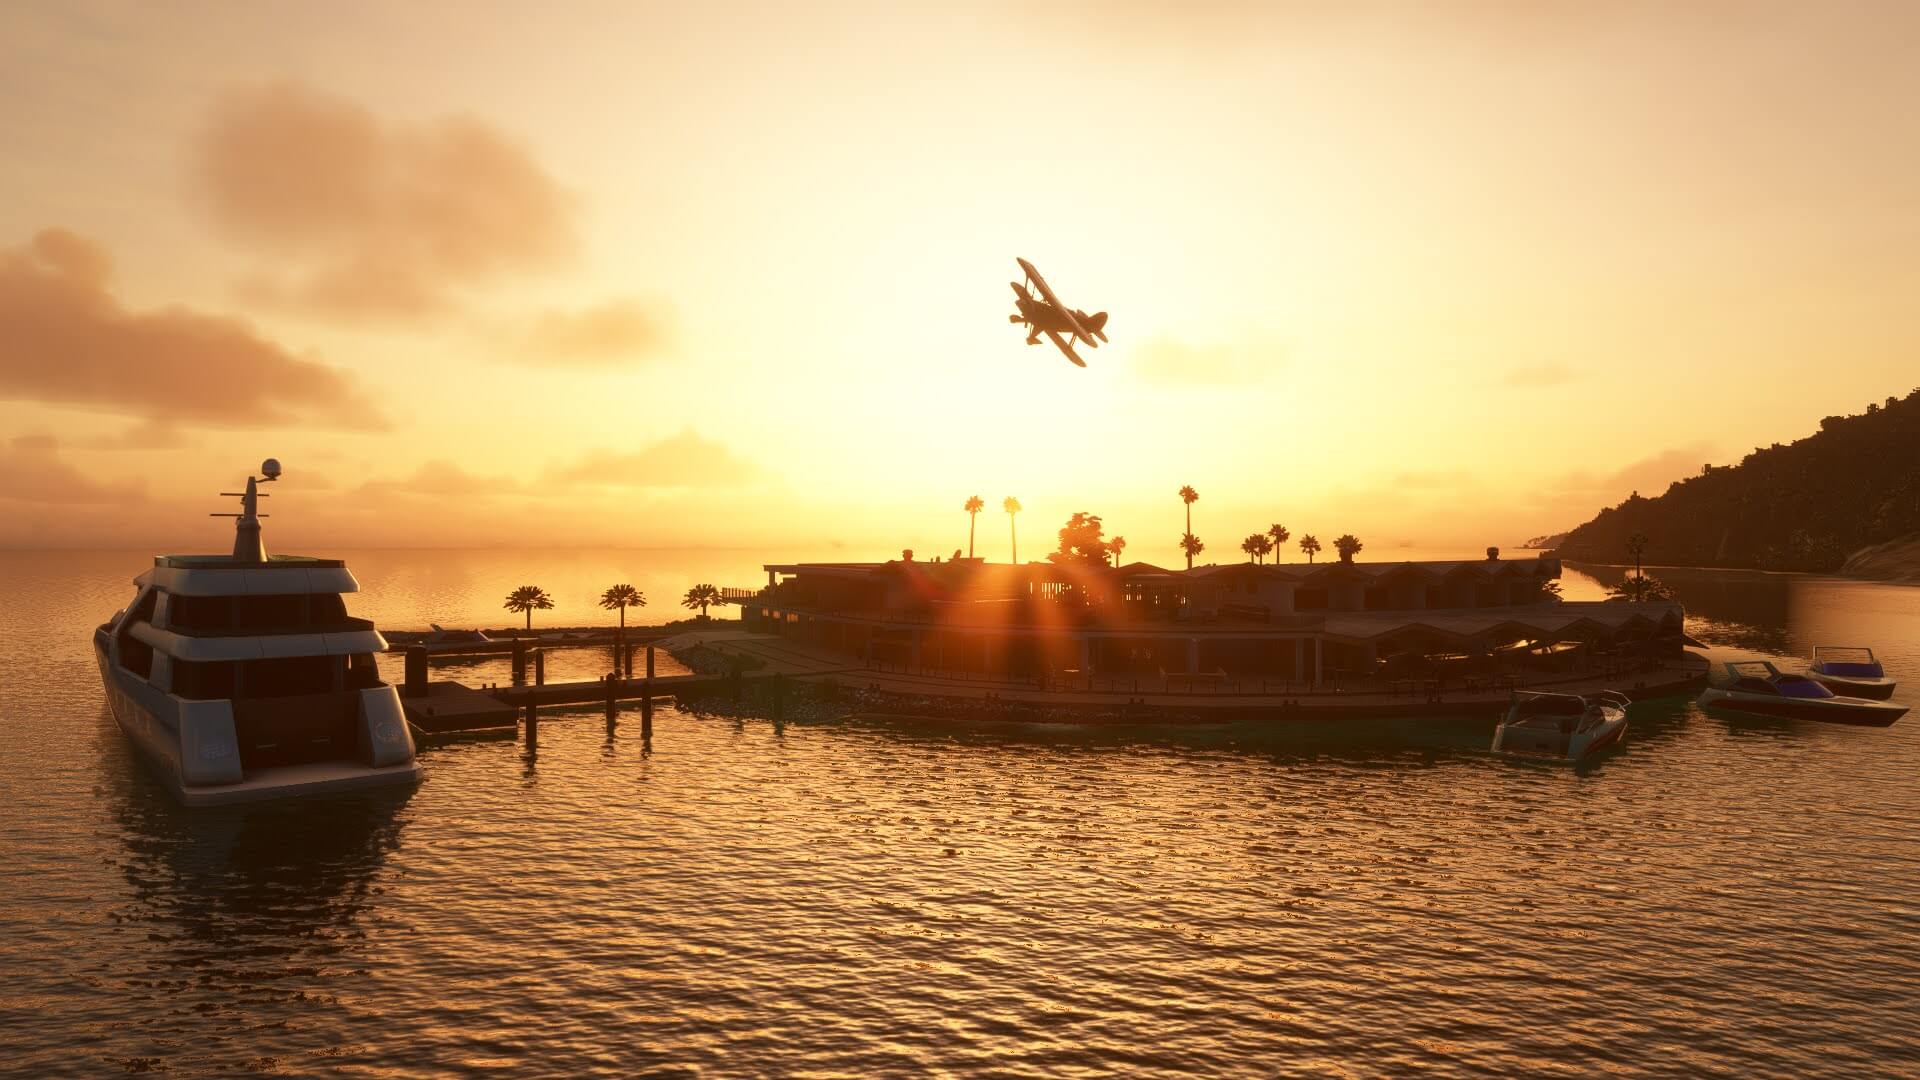 The silhouette of a bi-plane is cast with the sun behind as it overflies a private yacht parked on a marina.